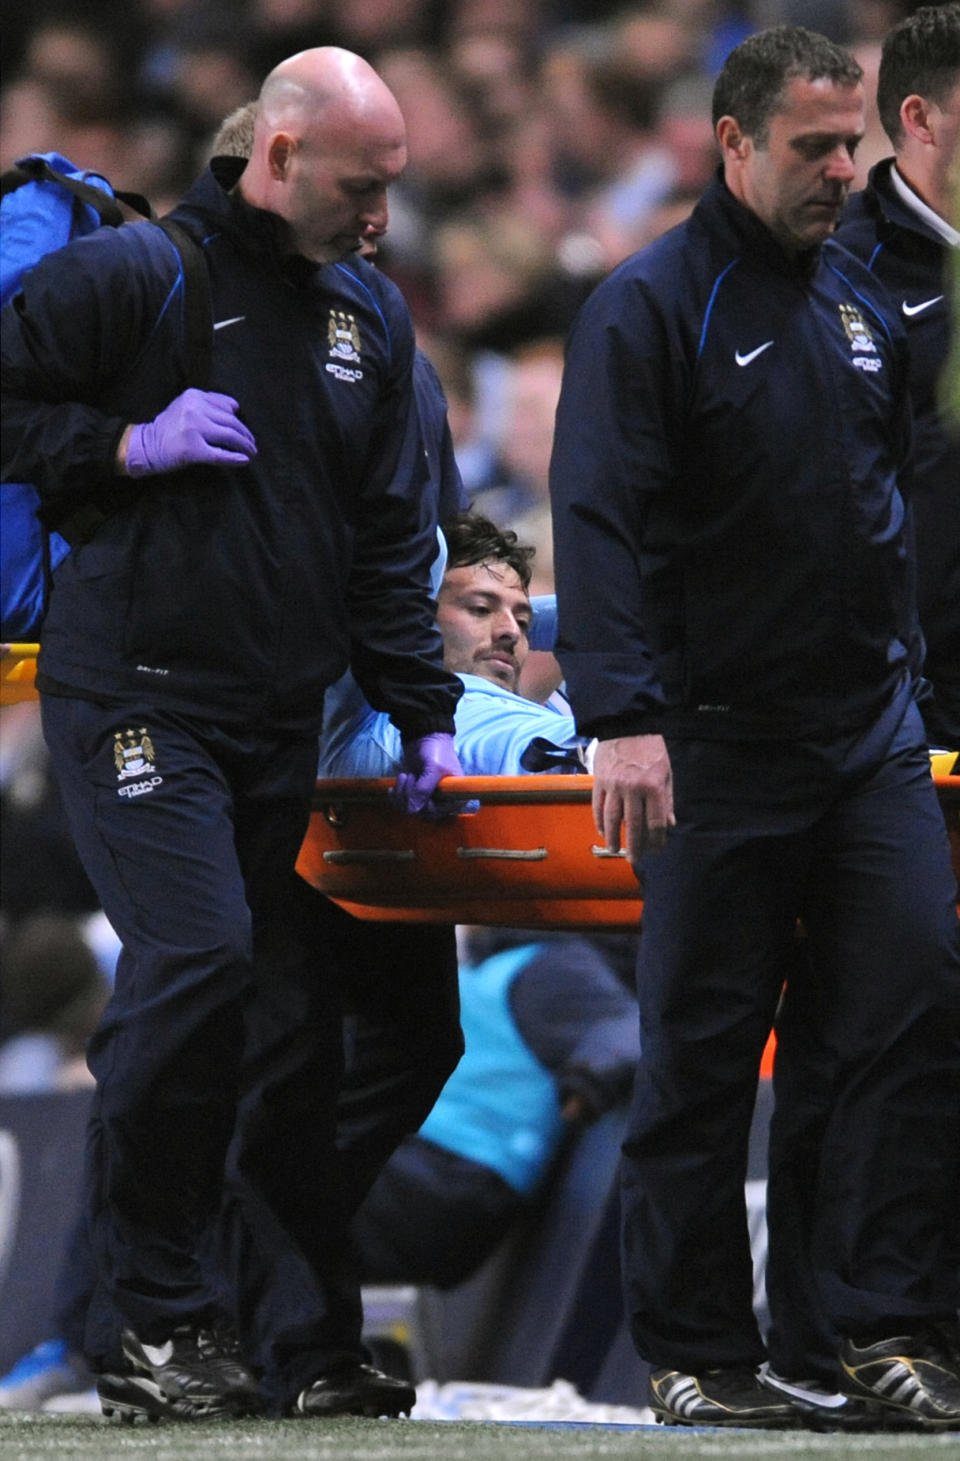 Manchester City's David Silva, center, is stretchered from the pitch during the English Premier League soccer match against West Bromwich Albion at the Etihad Stadium, Manchester, England, Monday April 21, 2014. (AP Photo/Rui Vieira)